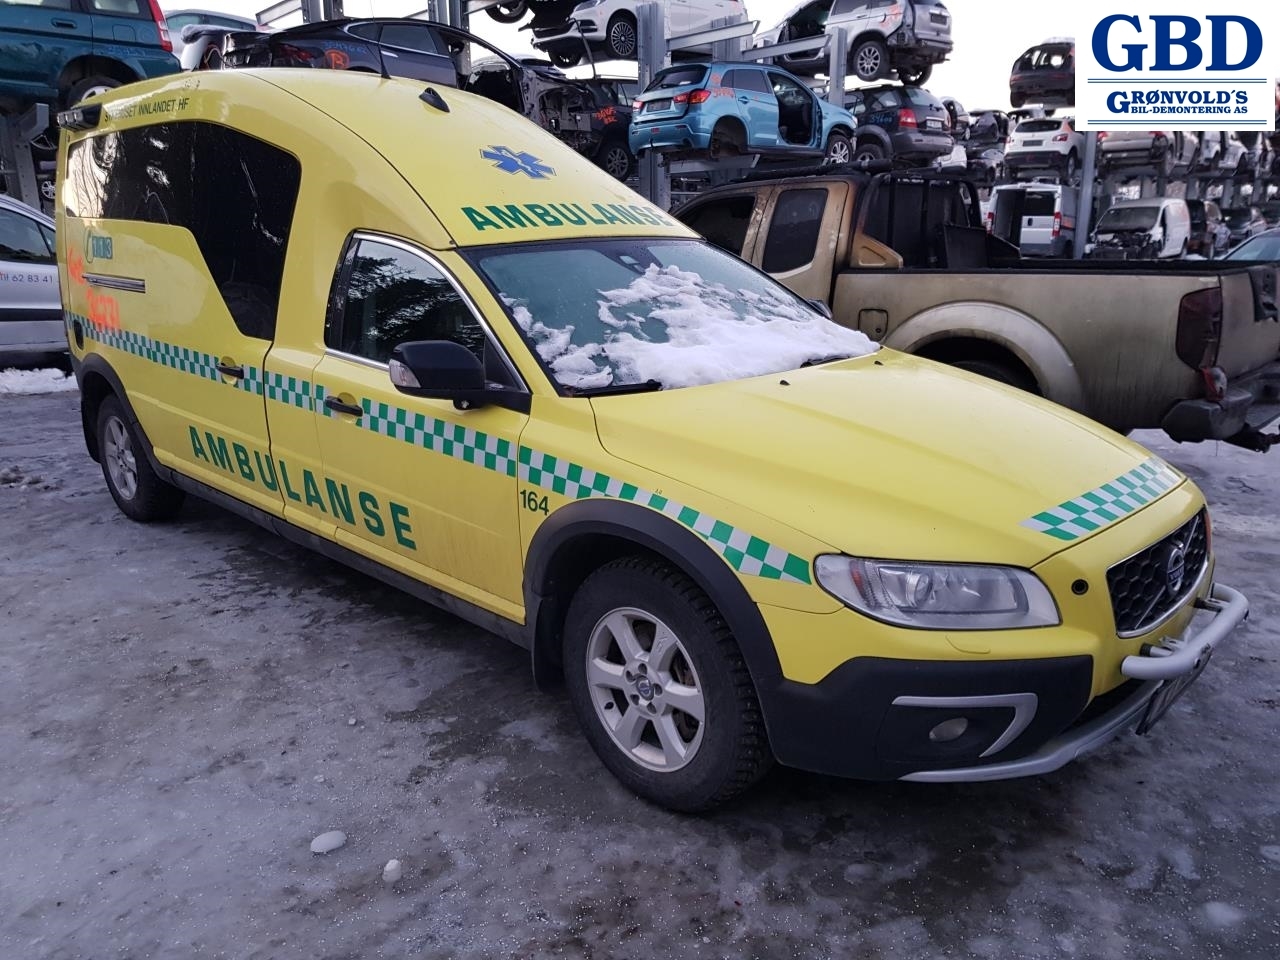 Volvo V70, 2014-2016 (Type III, Fase 2) parts car, Engine code: D5244T15, Gearbox code: 